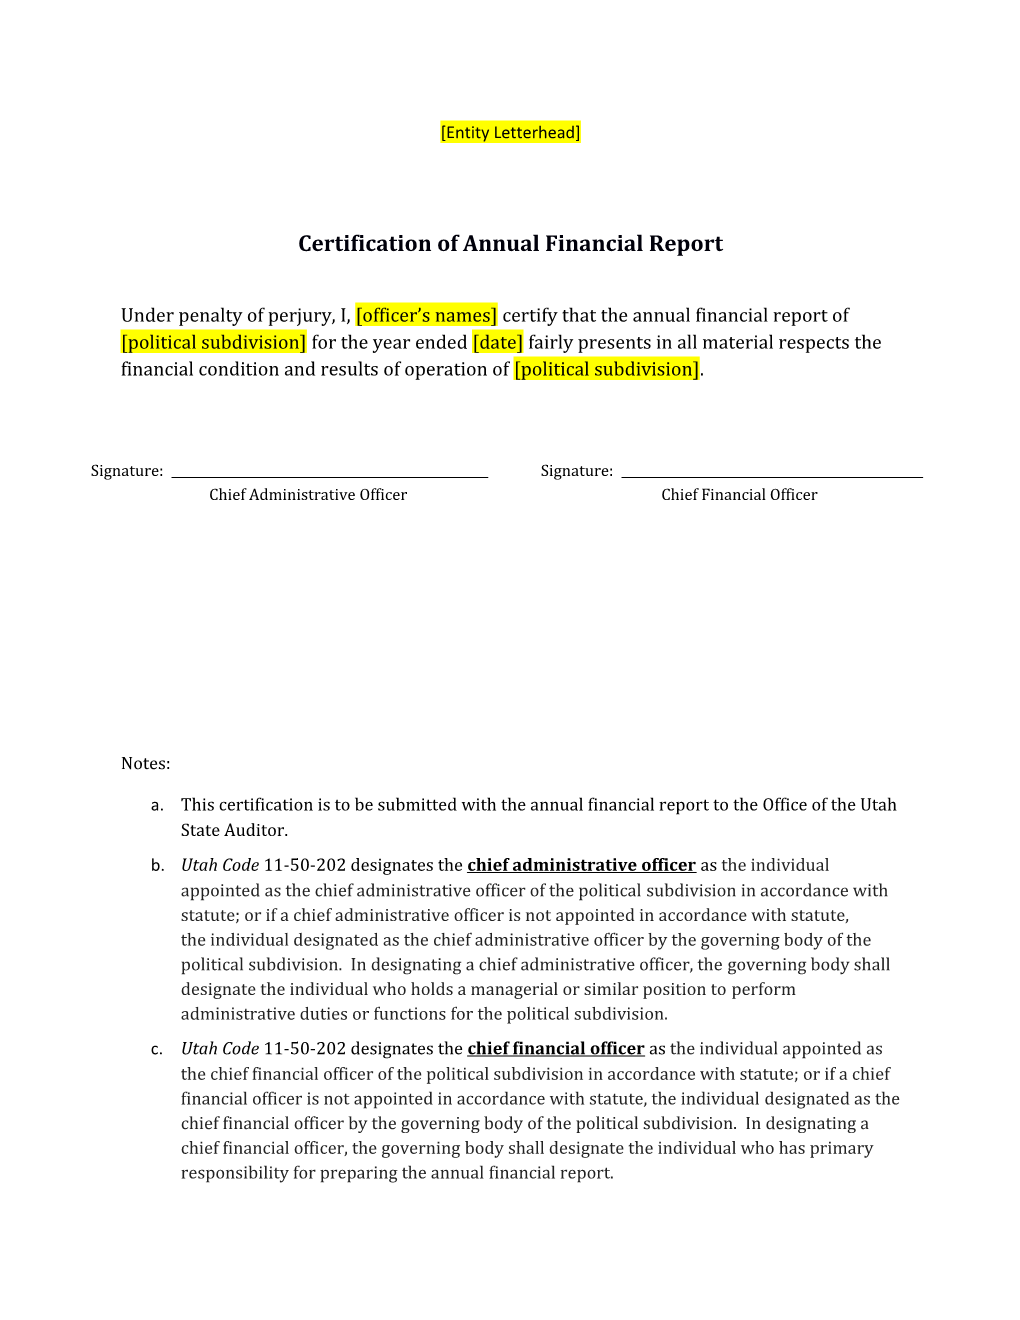 Certification of Annual Financial Report